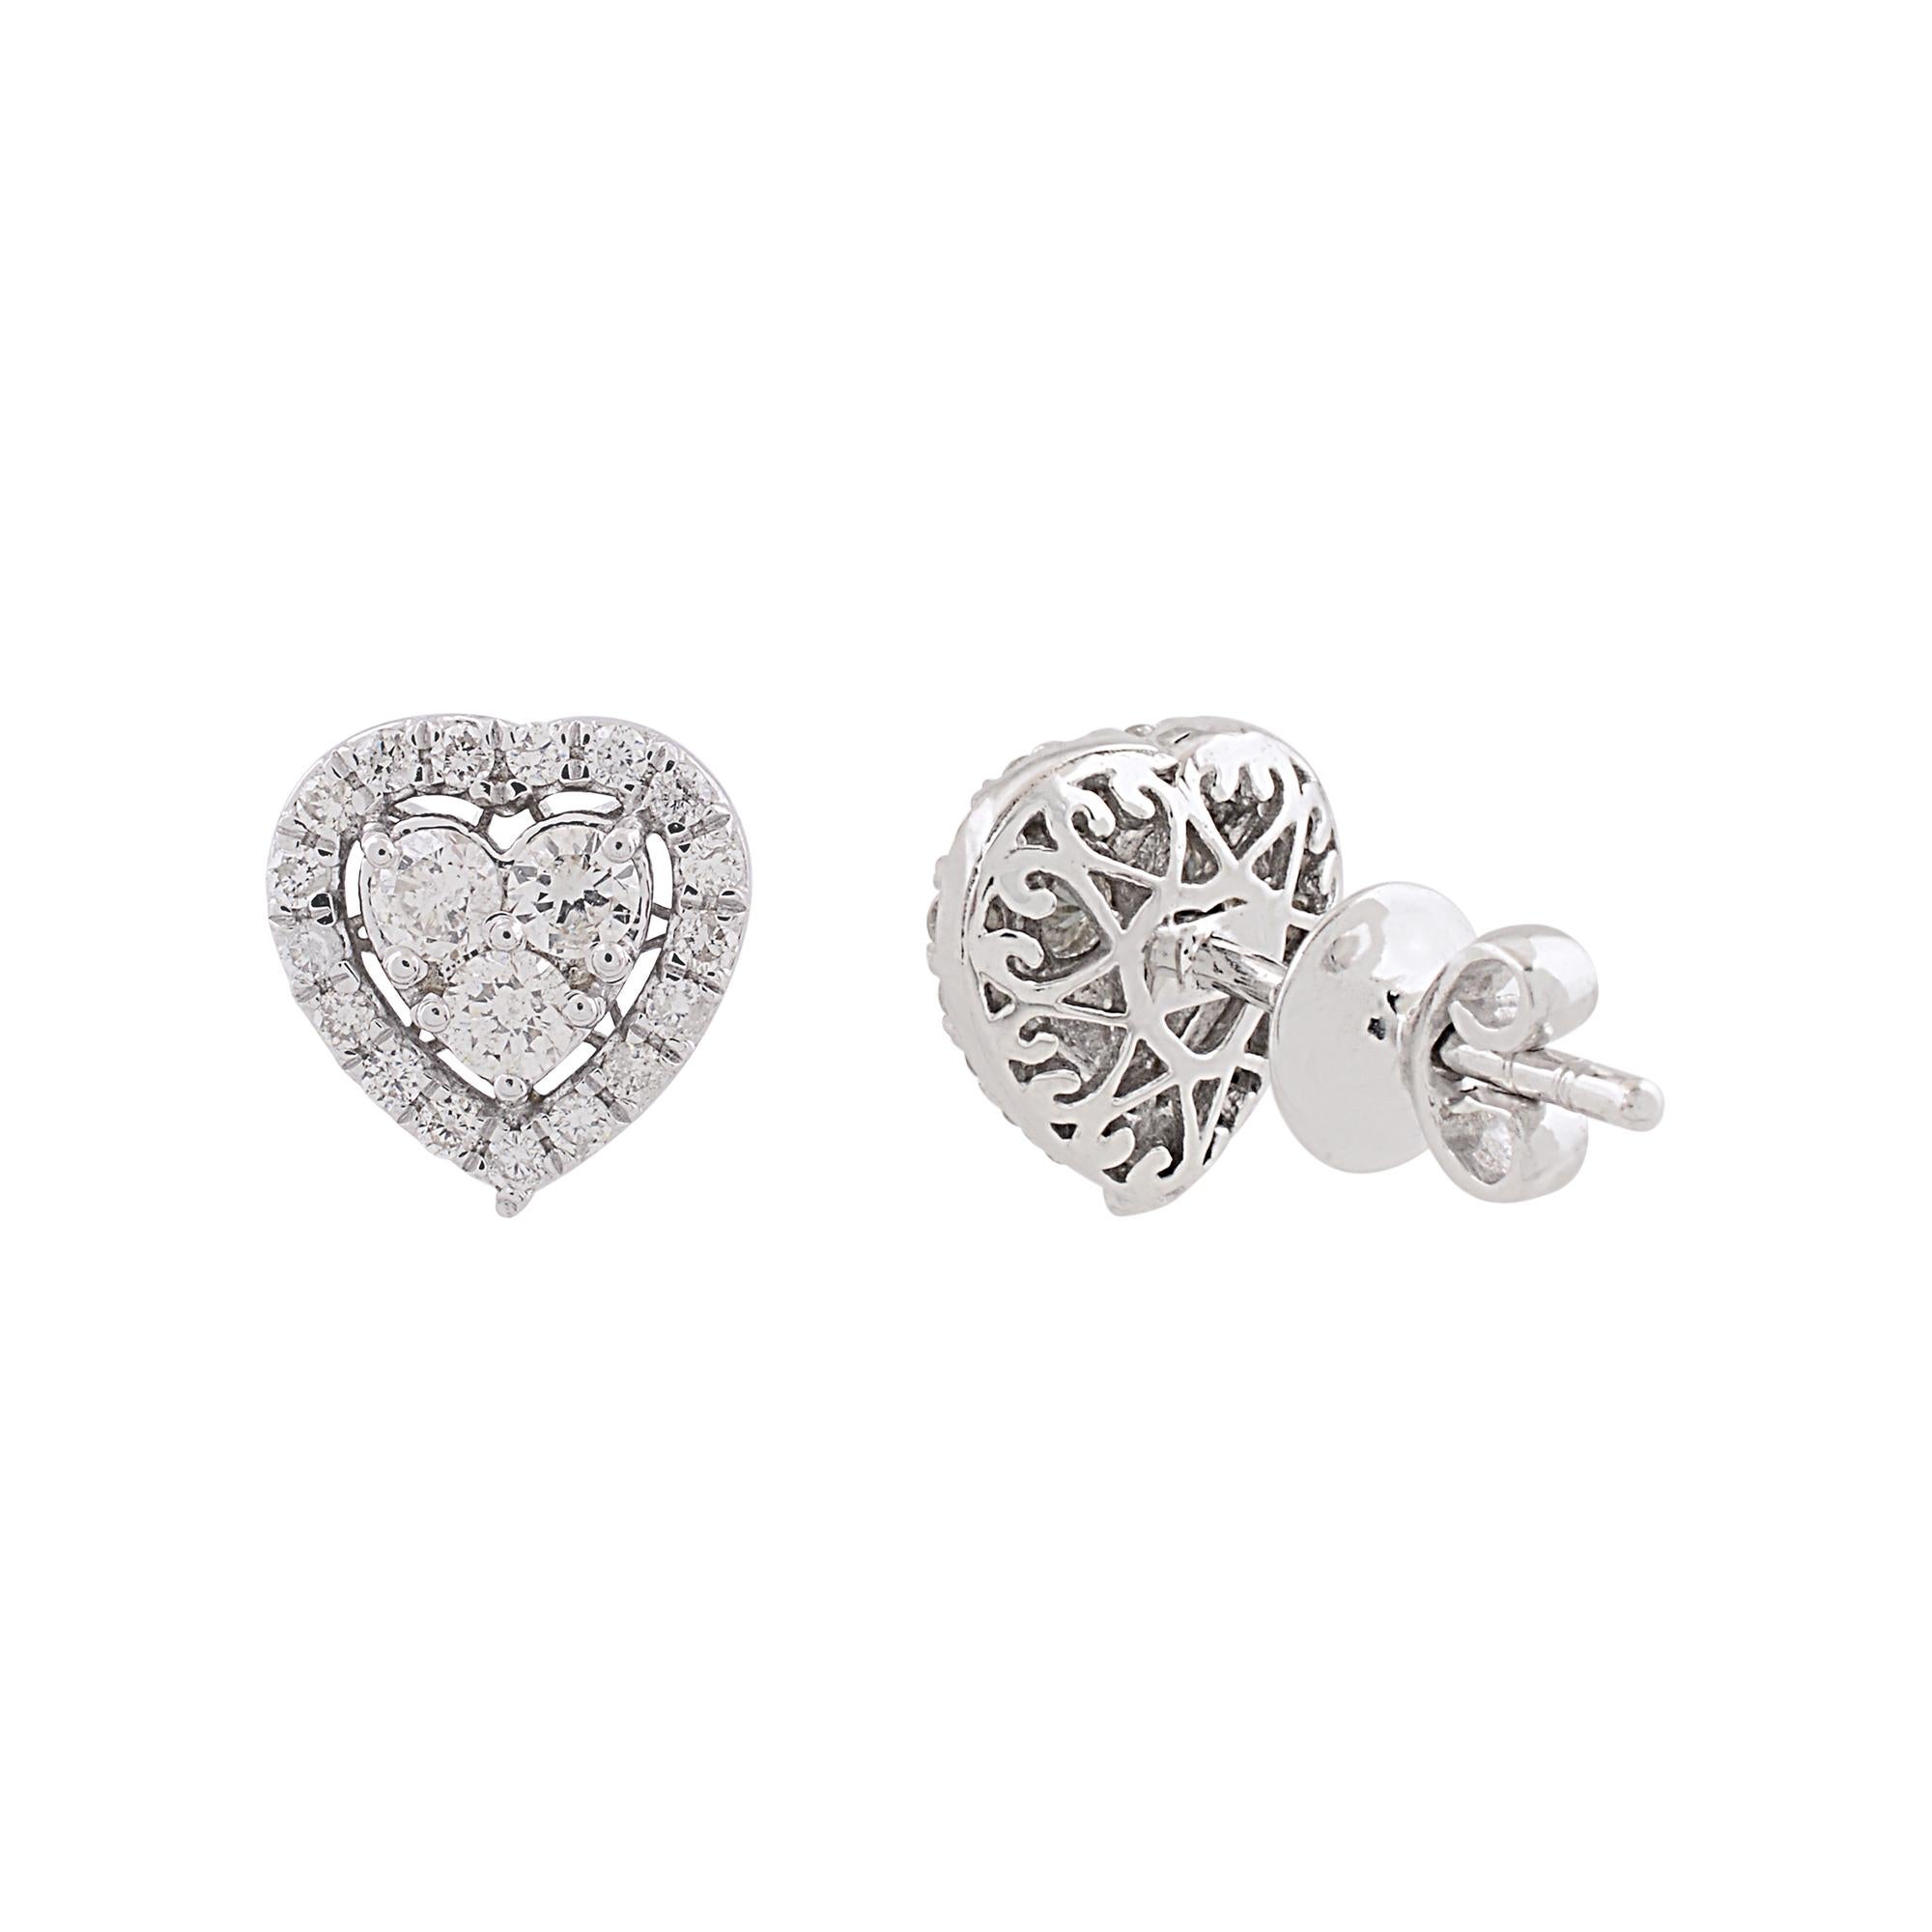 Indulge in a timeless symbol of love and elegance with these exquisite Natural SI/HI Round Diamond Heart Stud Earrings, crafted in lustrous 10 Karat White Gold. These charming earrings are a celebration of romance and sophistication, designed to